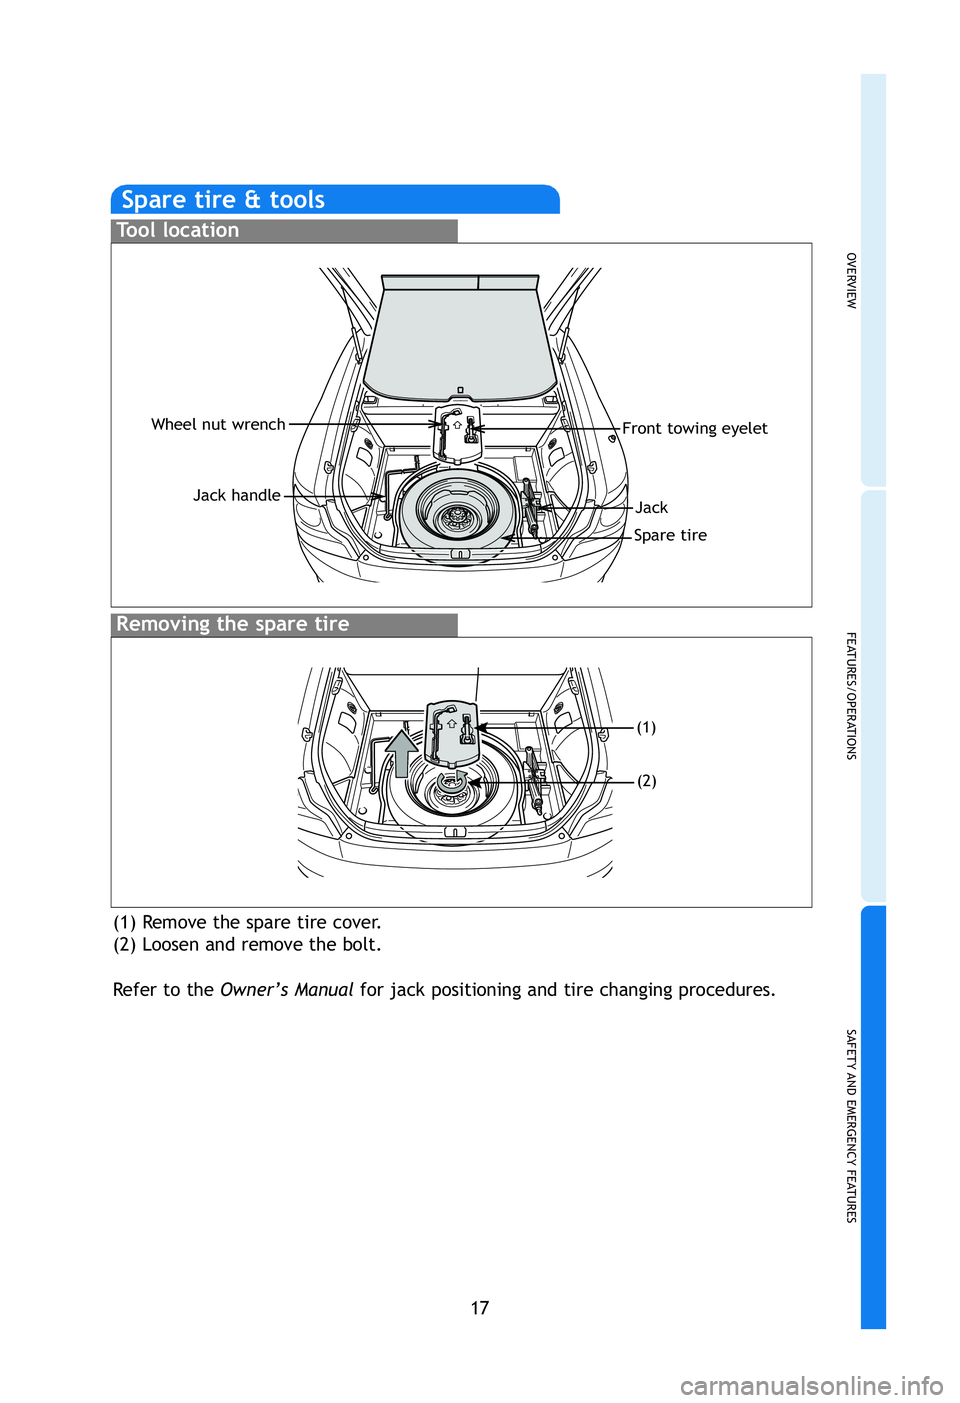 TOYOTA tC 2012  Owners Manual (in English) OVERVIEW
FEATURES/OPERATIONS
SAFETY AND EMERGENCY FEATURES
17
rn
ator
on s
ld
s
st
Spare tire & tools
Tool location
Removing the spare tire 
(1) Remove the spare tire cover.
(2) Loosen and remove the 